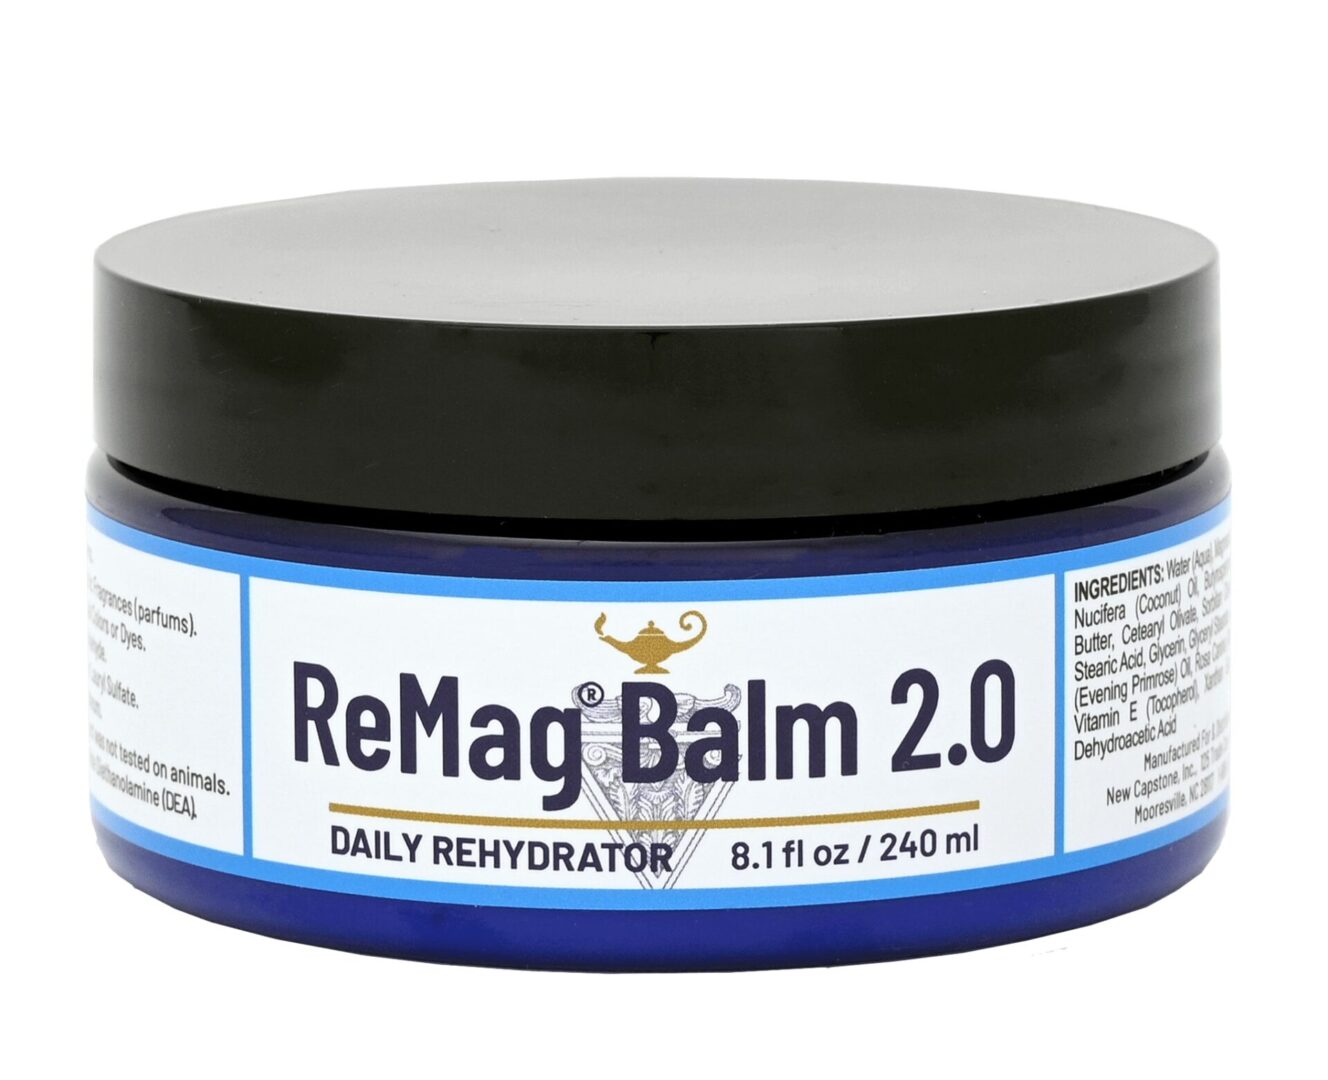 A jar of remag balm 2. 0 is shown here